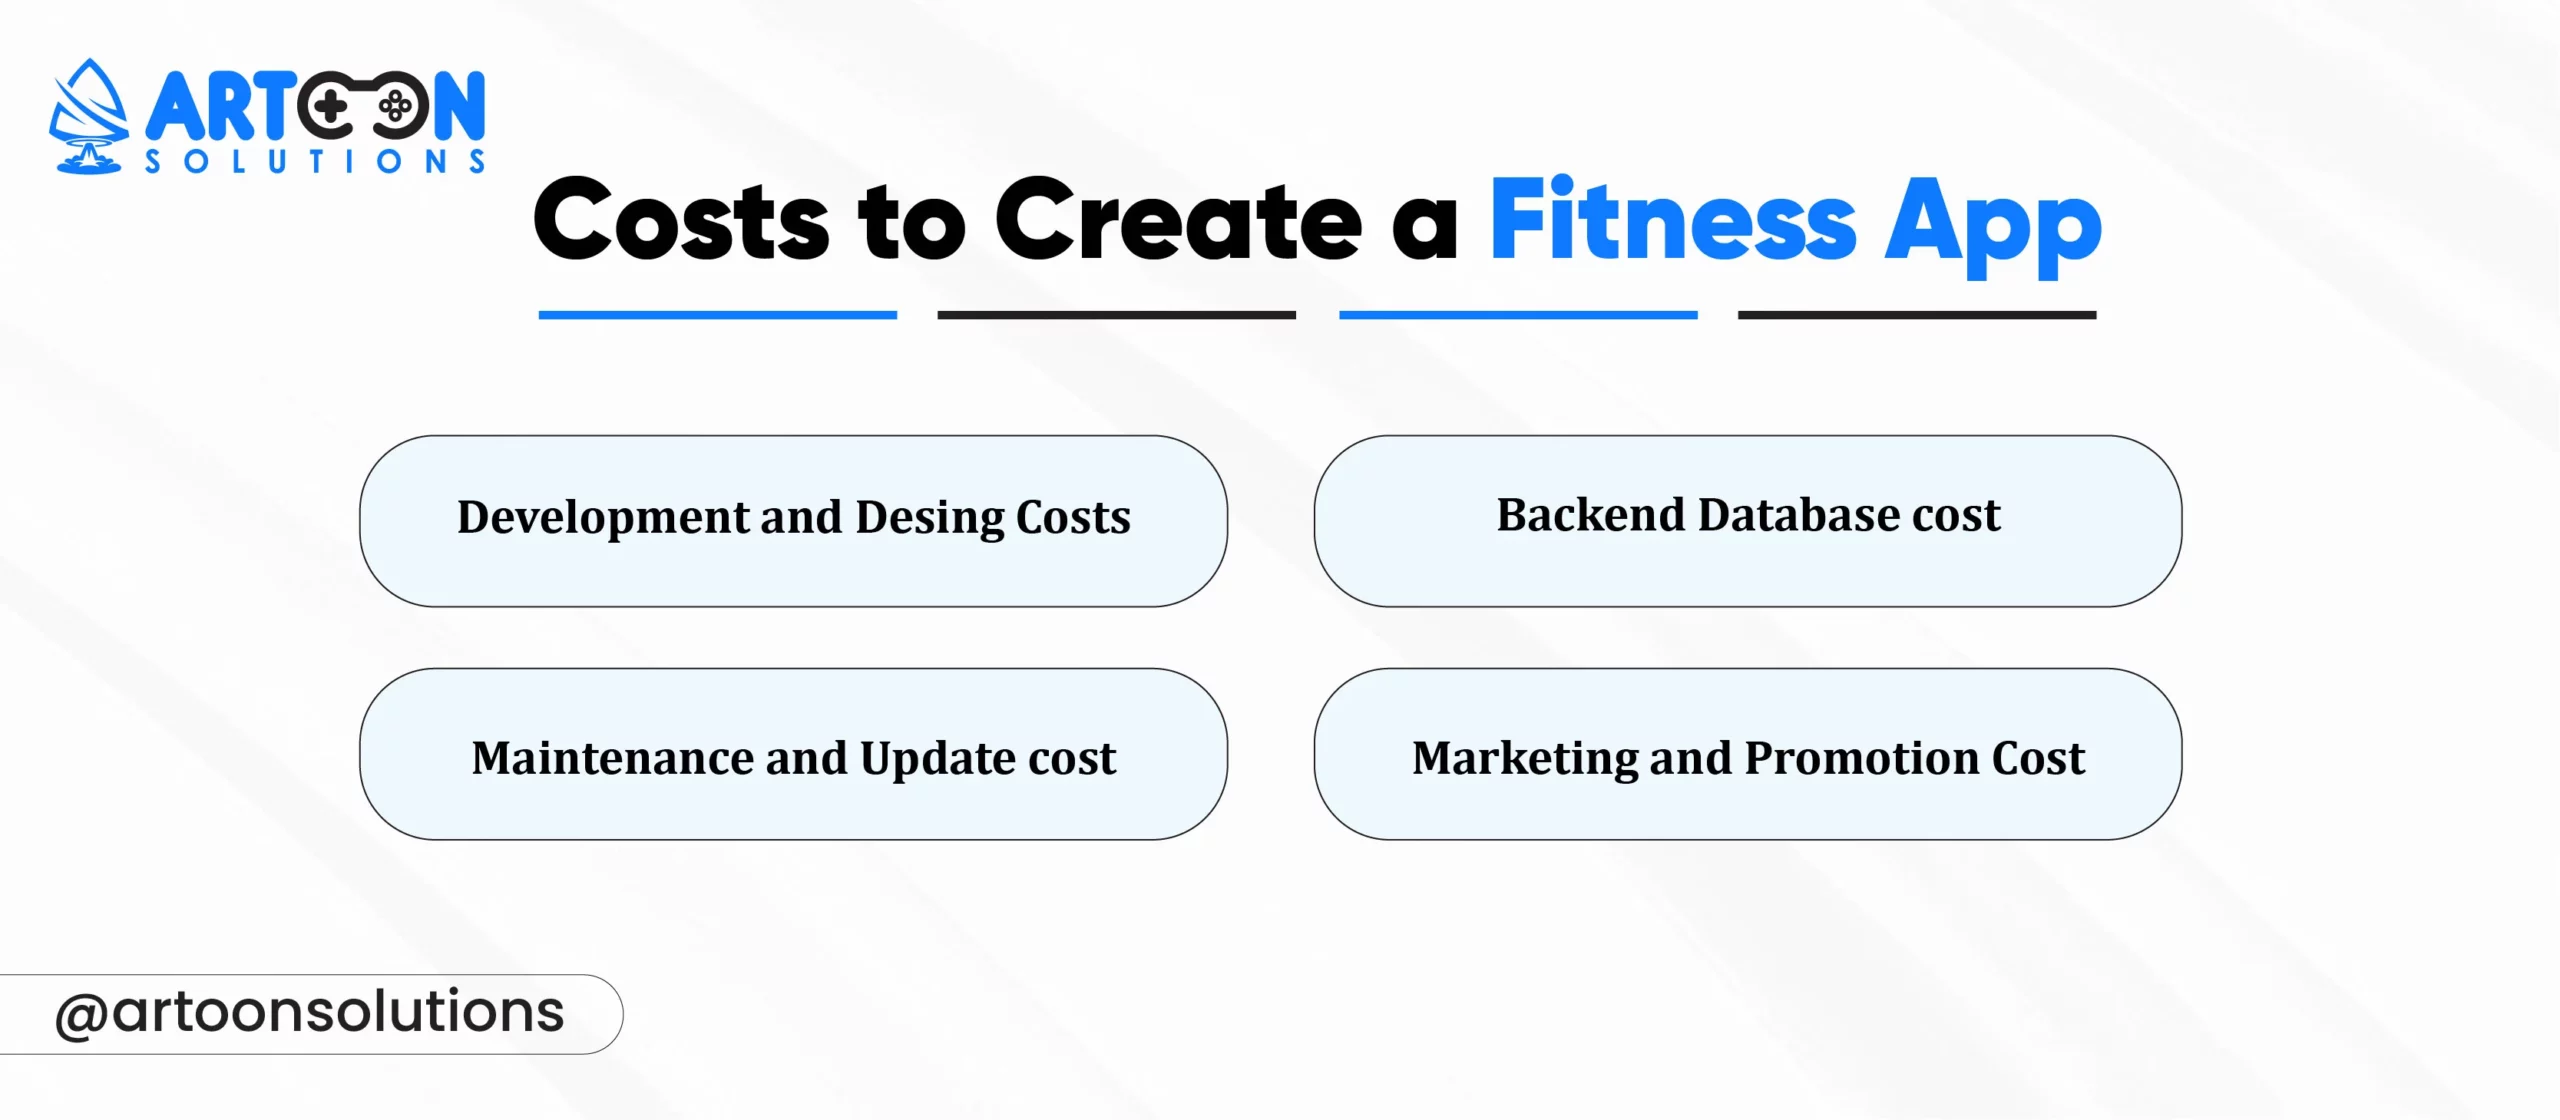 Costs to Create a Fitness App